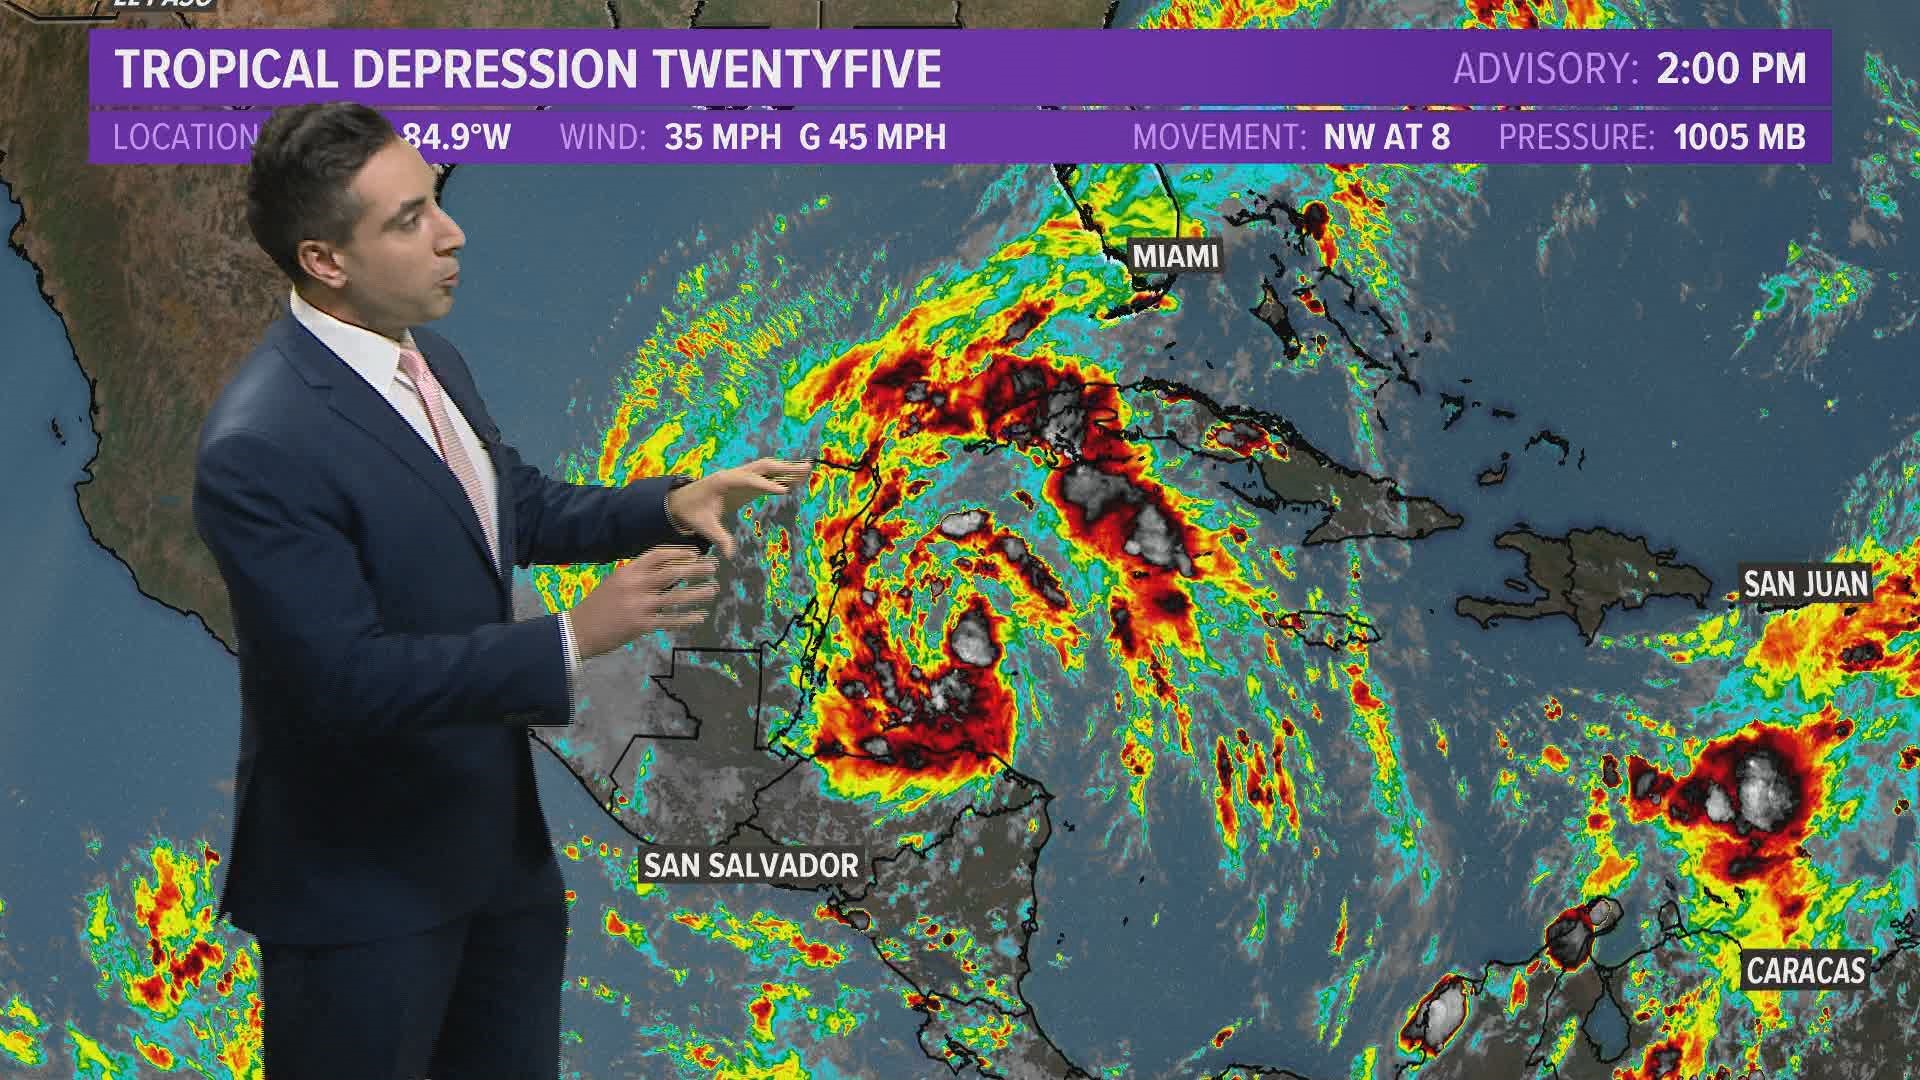 In the Pacific, Hurricane Marie has intensified to a major Category 4 storm, while Tropical Depression 25 has formed off the coast of the Yucatan Peninsula.